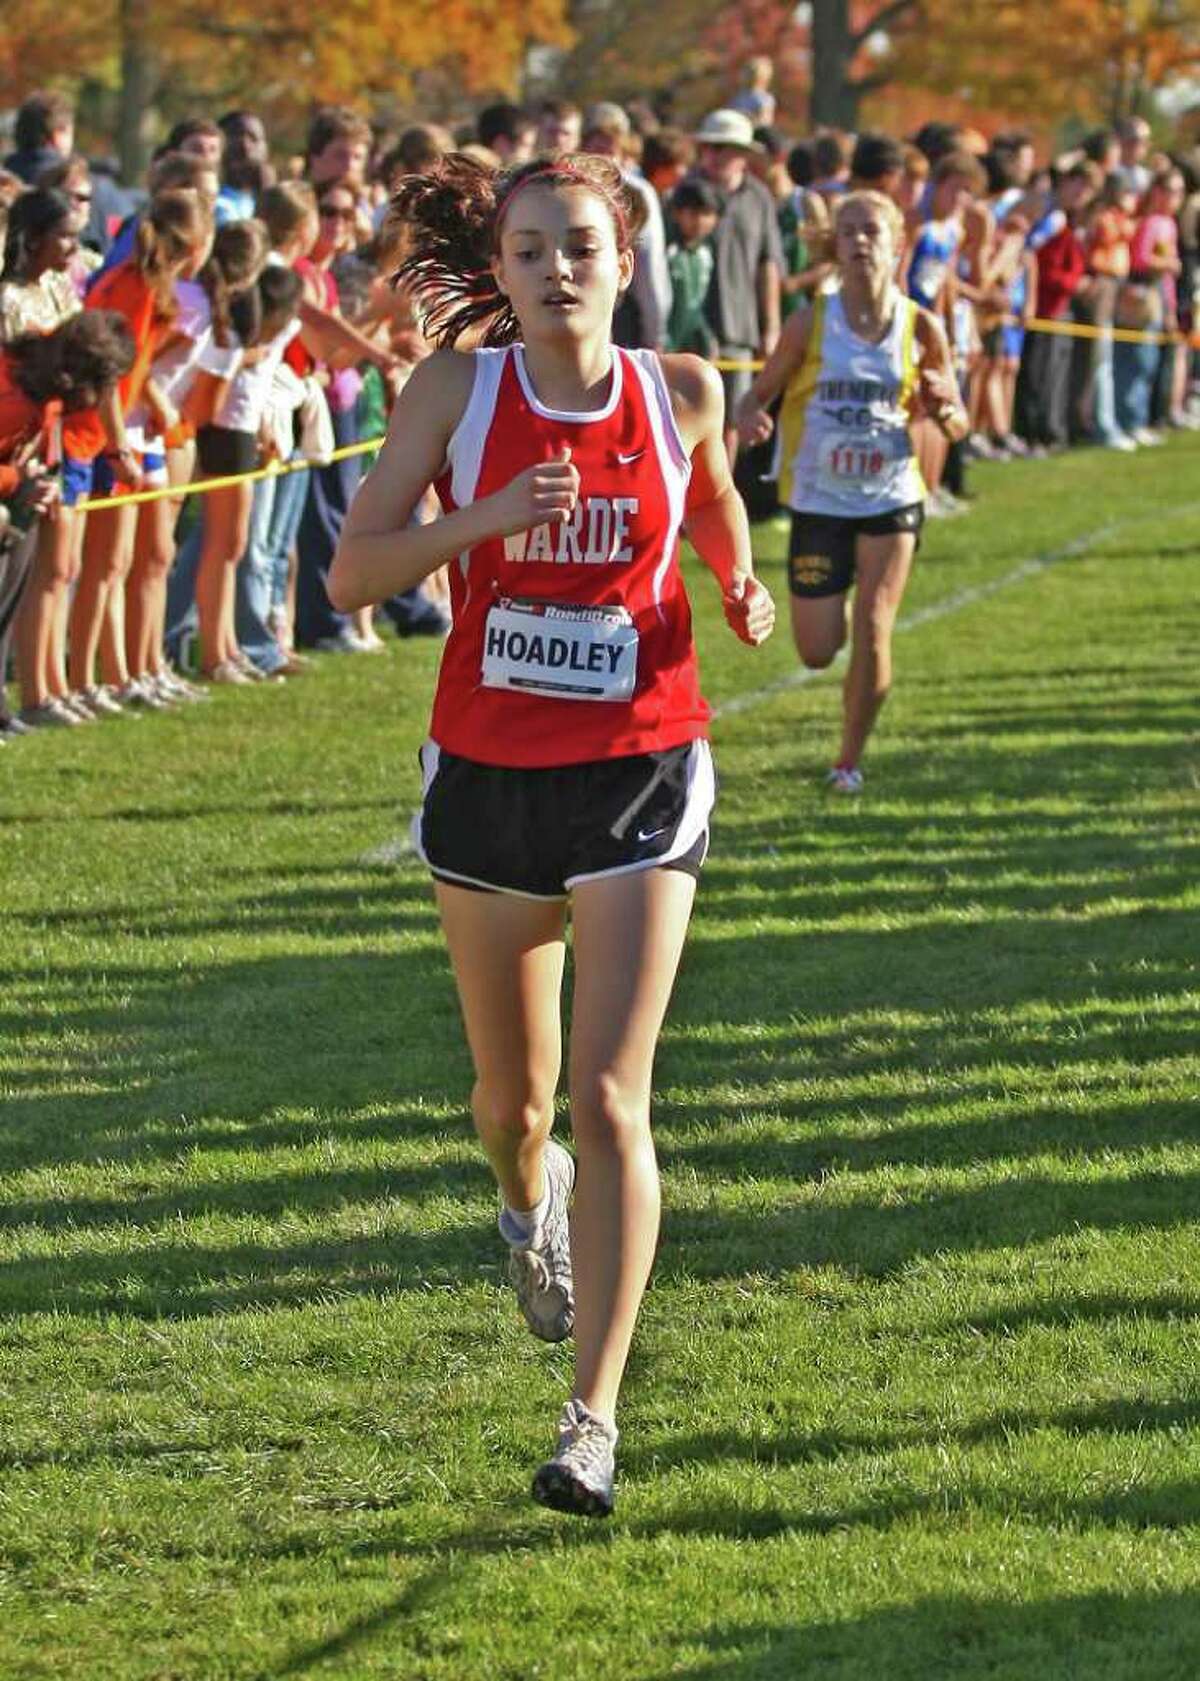 Fairfield Warde's Lexi Hoadley crosses the finish line during a race during the 2009 season. Hoadley should be the Mustangs' top female returning runner this year.